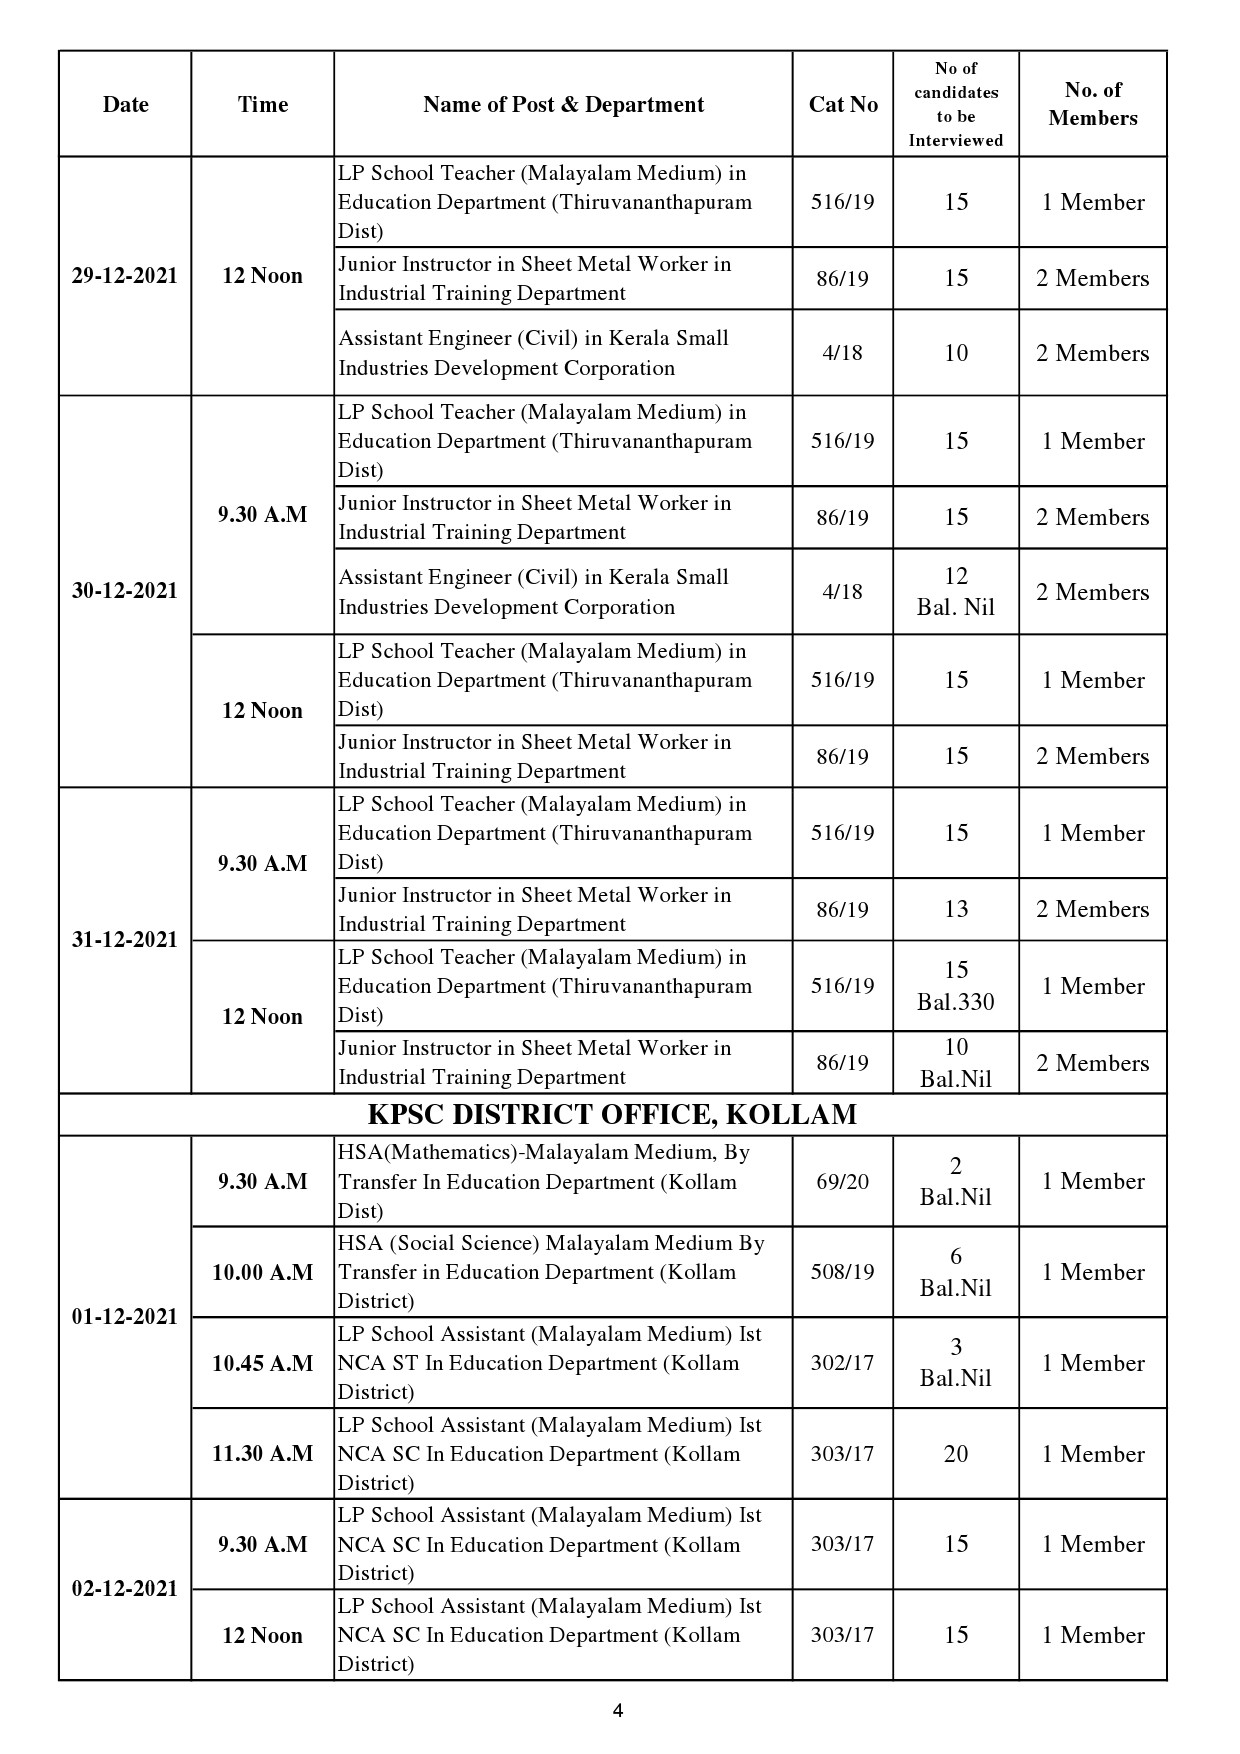 KPSC Interview Programme For The Month Of December 2021 - Notification Image 4